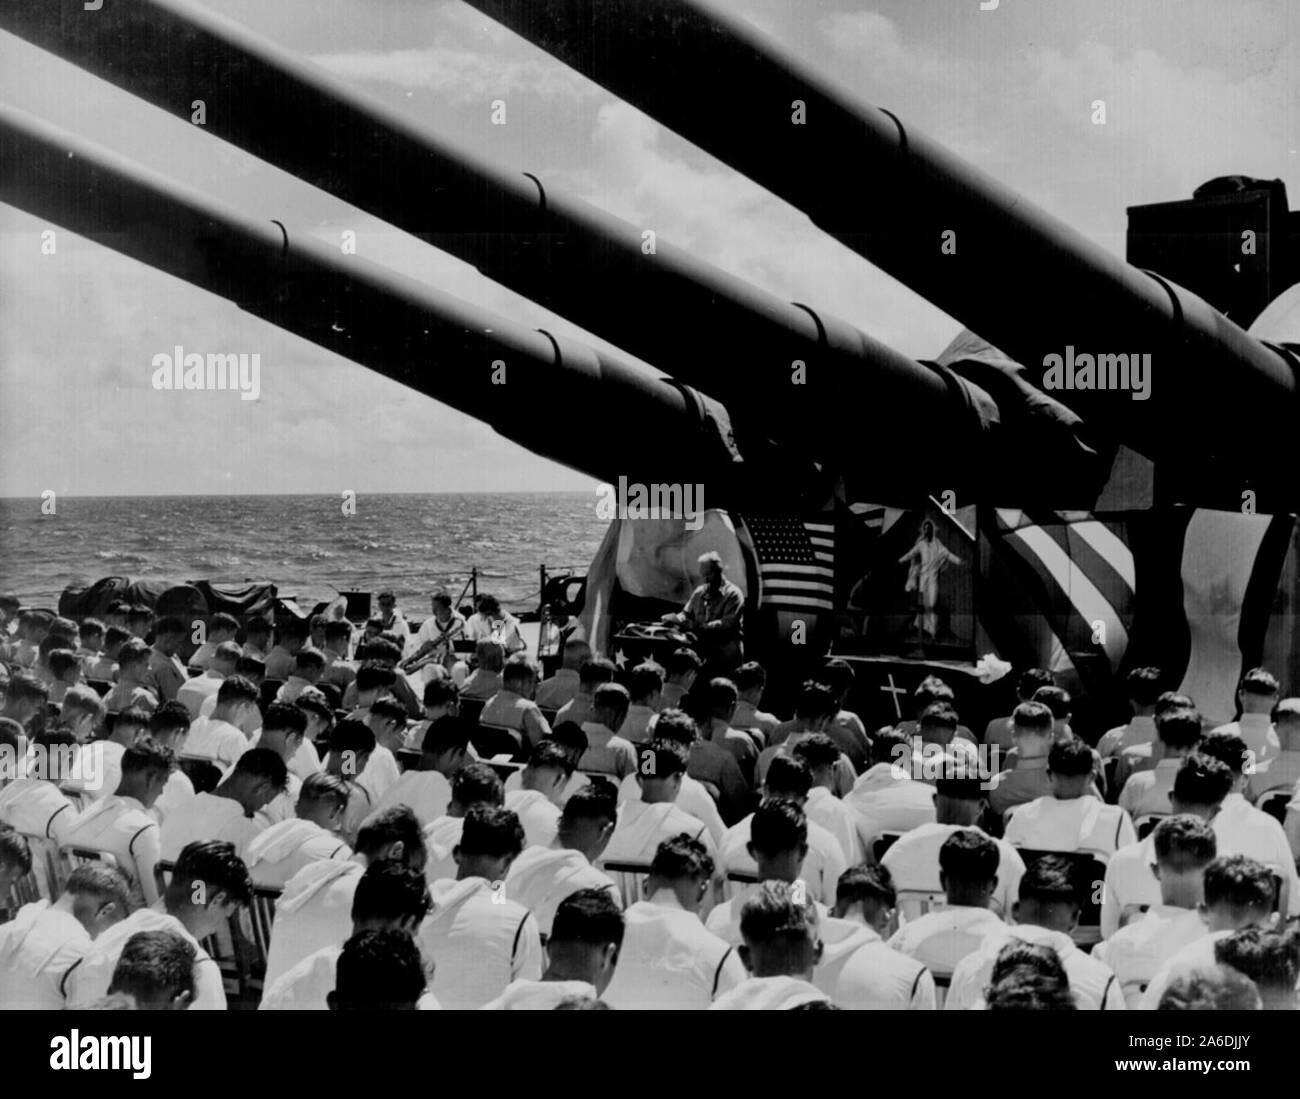 The crew of the USS SOUTH DAKOTA stands with bowed heads, while Chaplain N. D. Lindner reads the benediction held in honor of fellow shipmates killed in the air action off Guam on June 19, 1944 Stock Photo